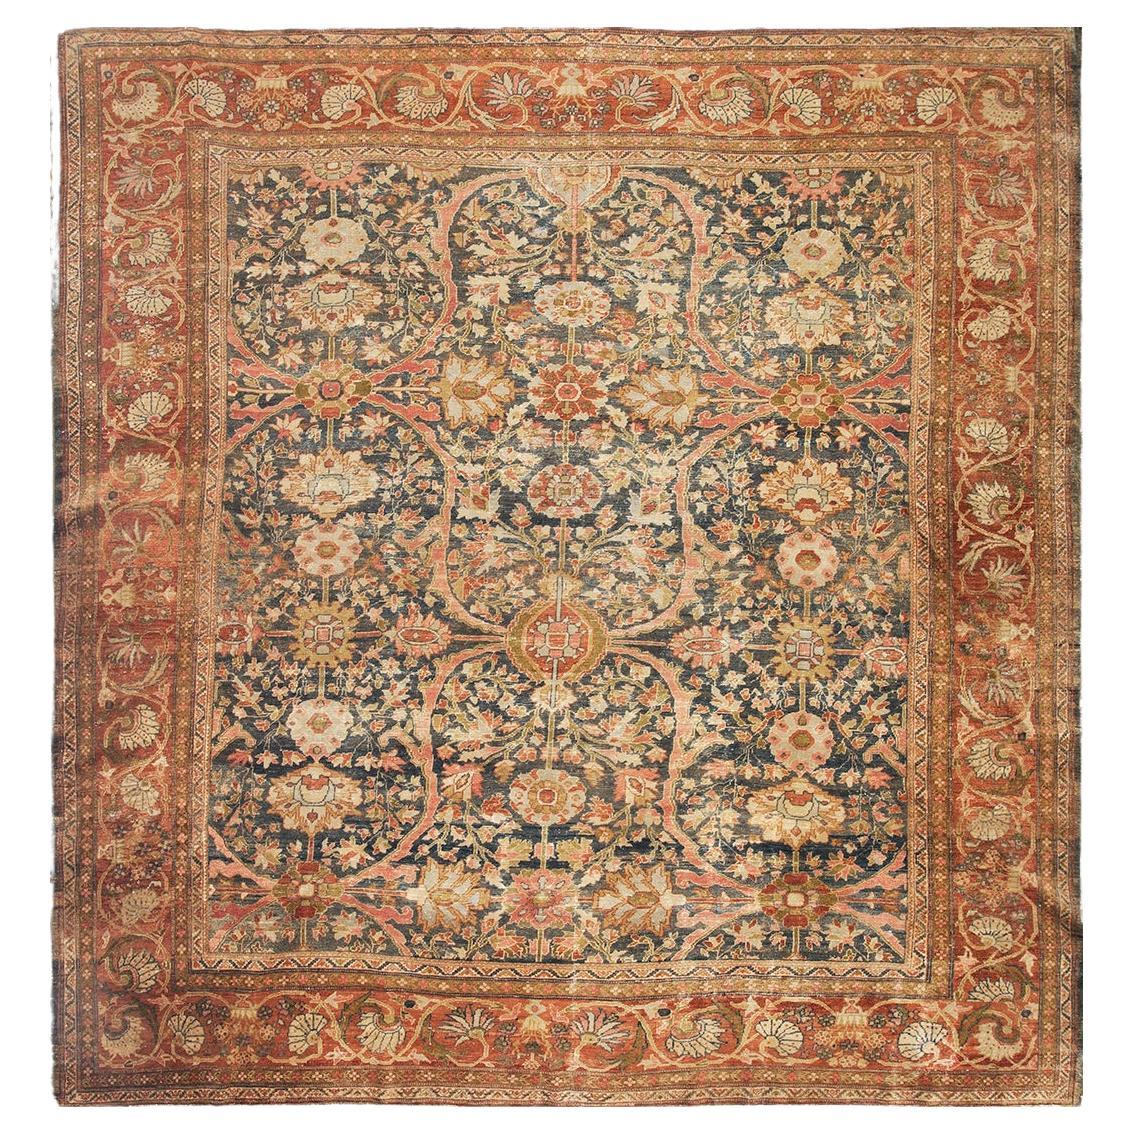 19th Century Persian Sultanabad Carpet ( 9'6" x 10' - 290 x 310 ) For Sale